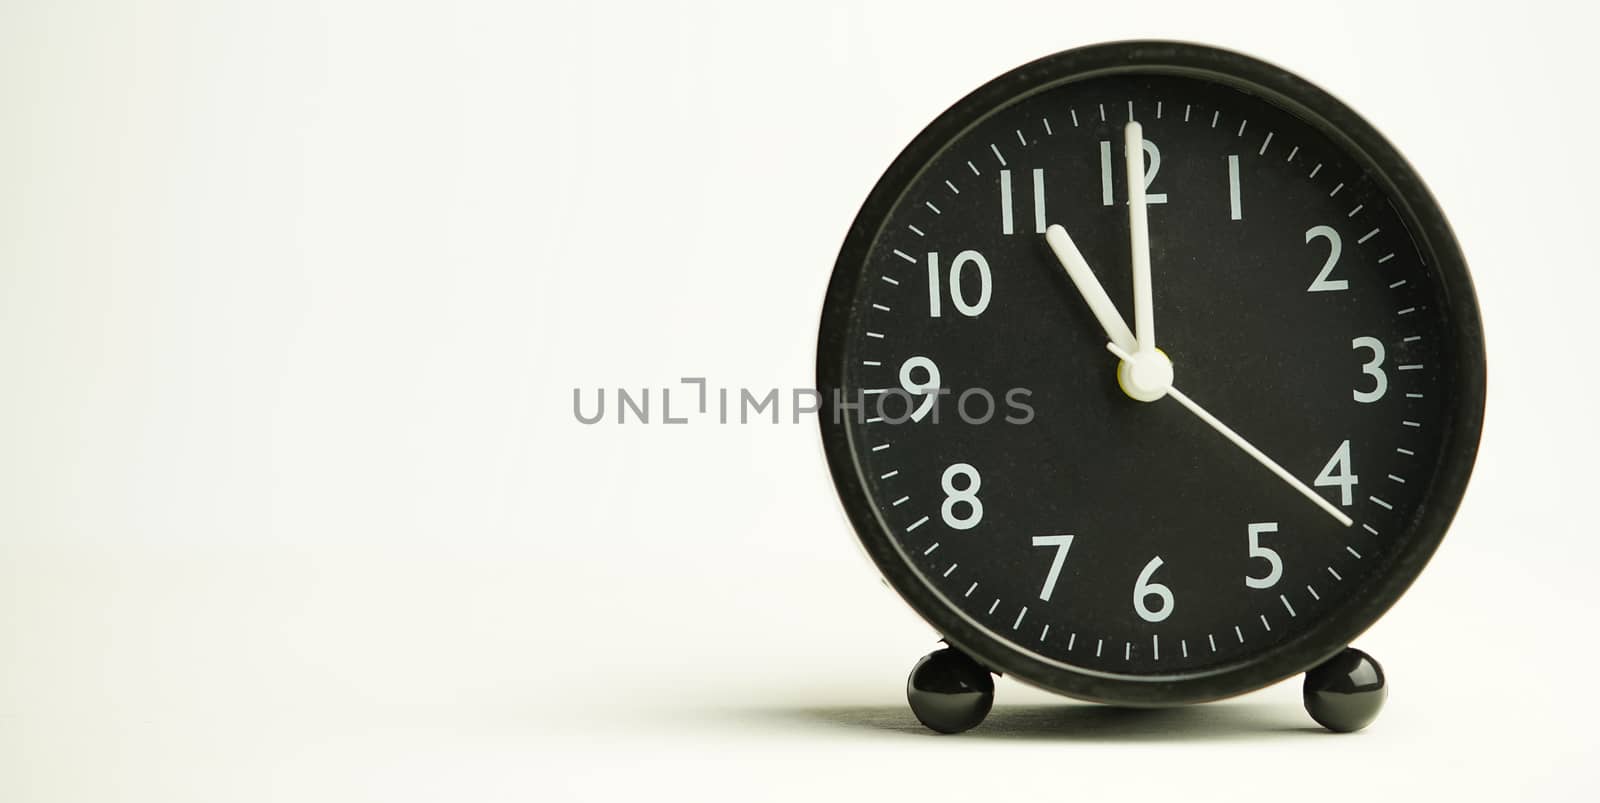 Decorative close-up black analog alarm clock for 10 o'clock isol by noppha80